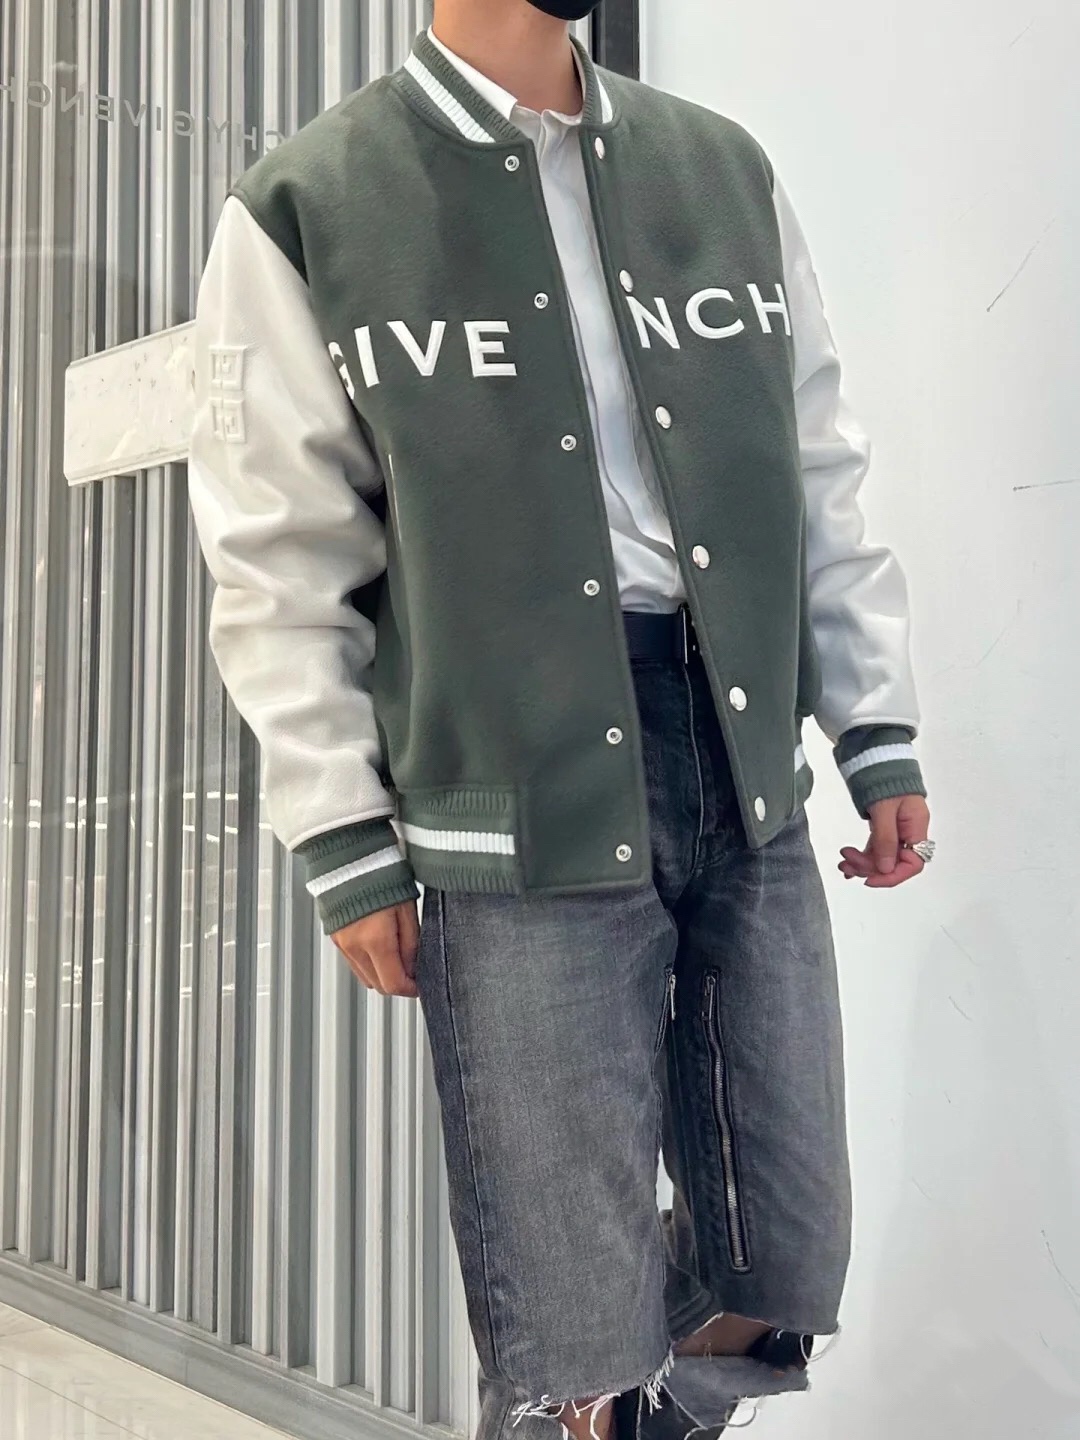 Givenchy Outwear